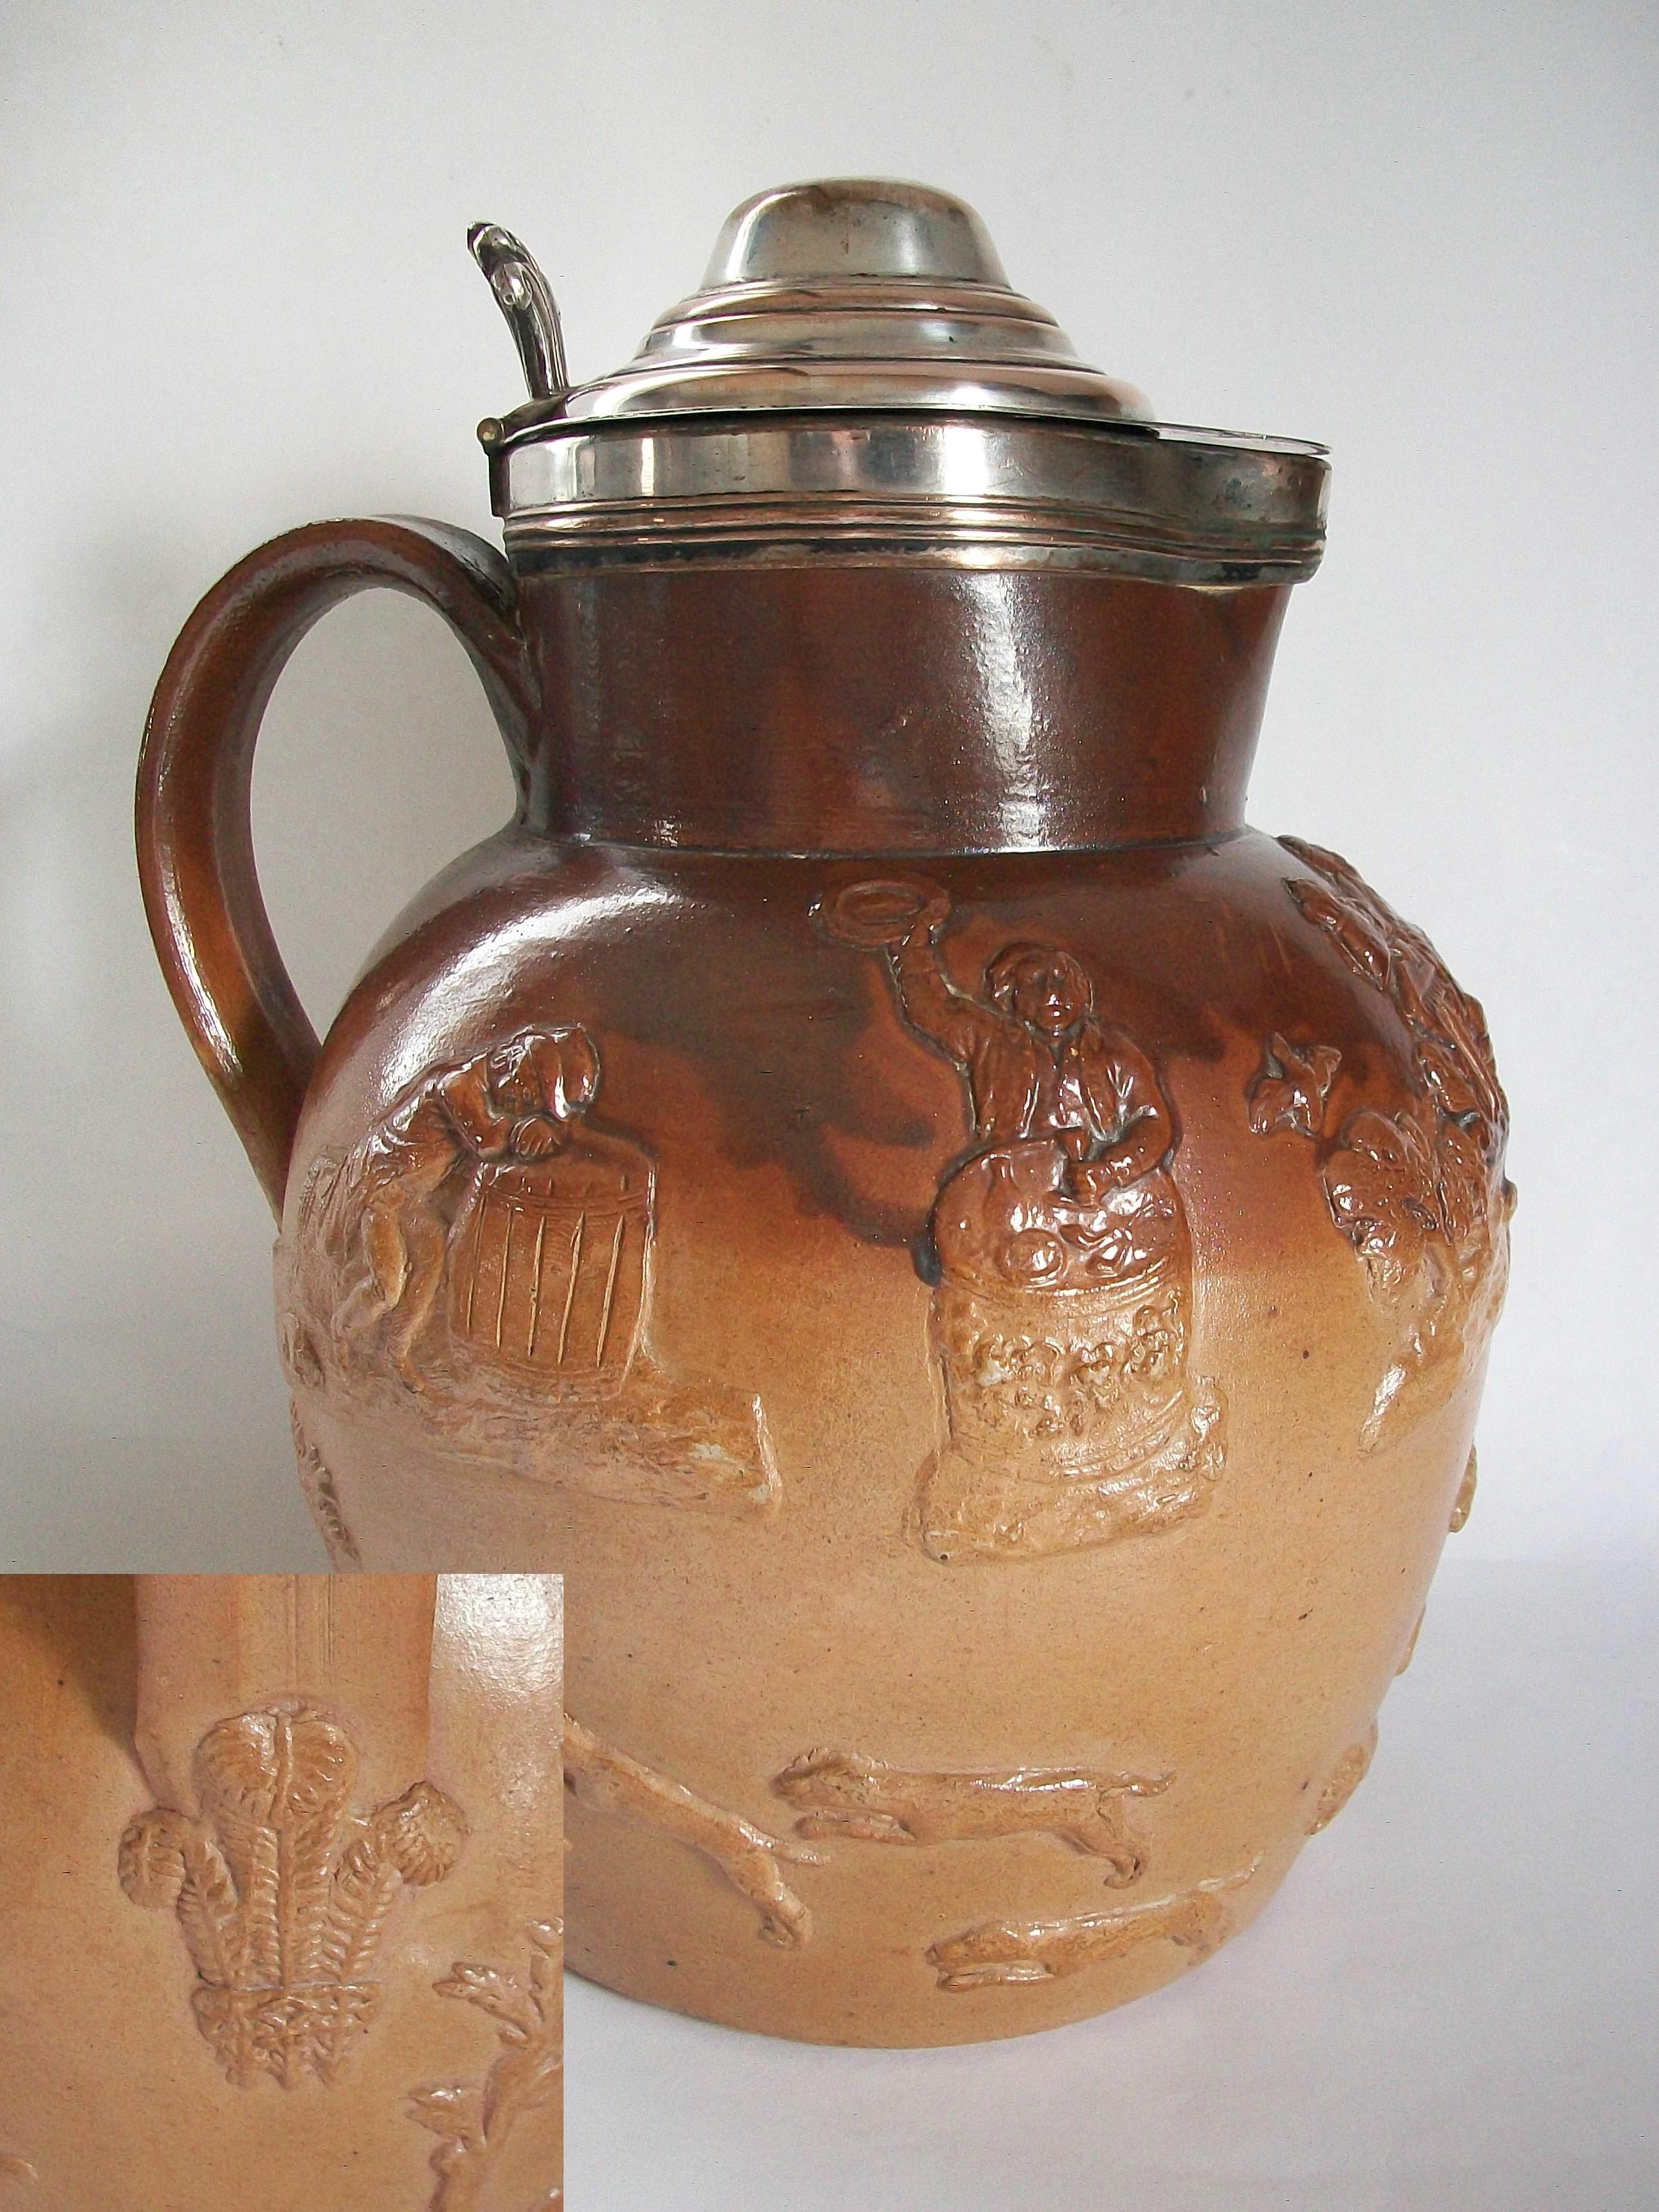 Victorian stoneware salt glaze ale pitcher with embossed 'hunt scene' and Prince of Wales feathers at the base of the handle - unglazed interior - unsigned - United Kingdom - 19th century.

Good antique condition - corrosion & silver plate loss to